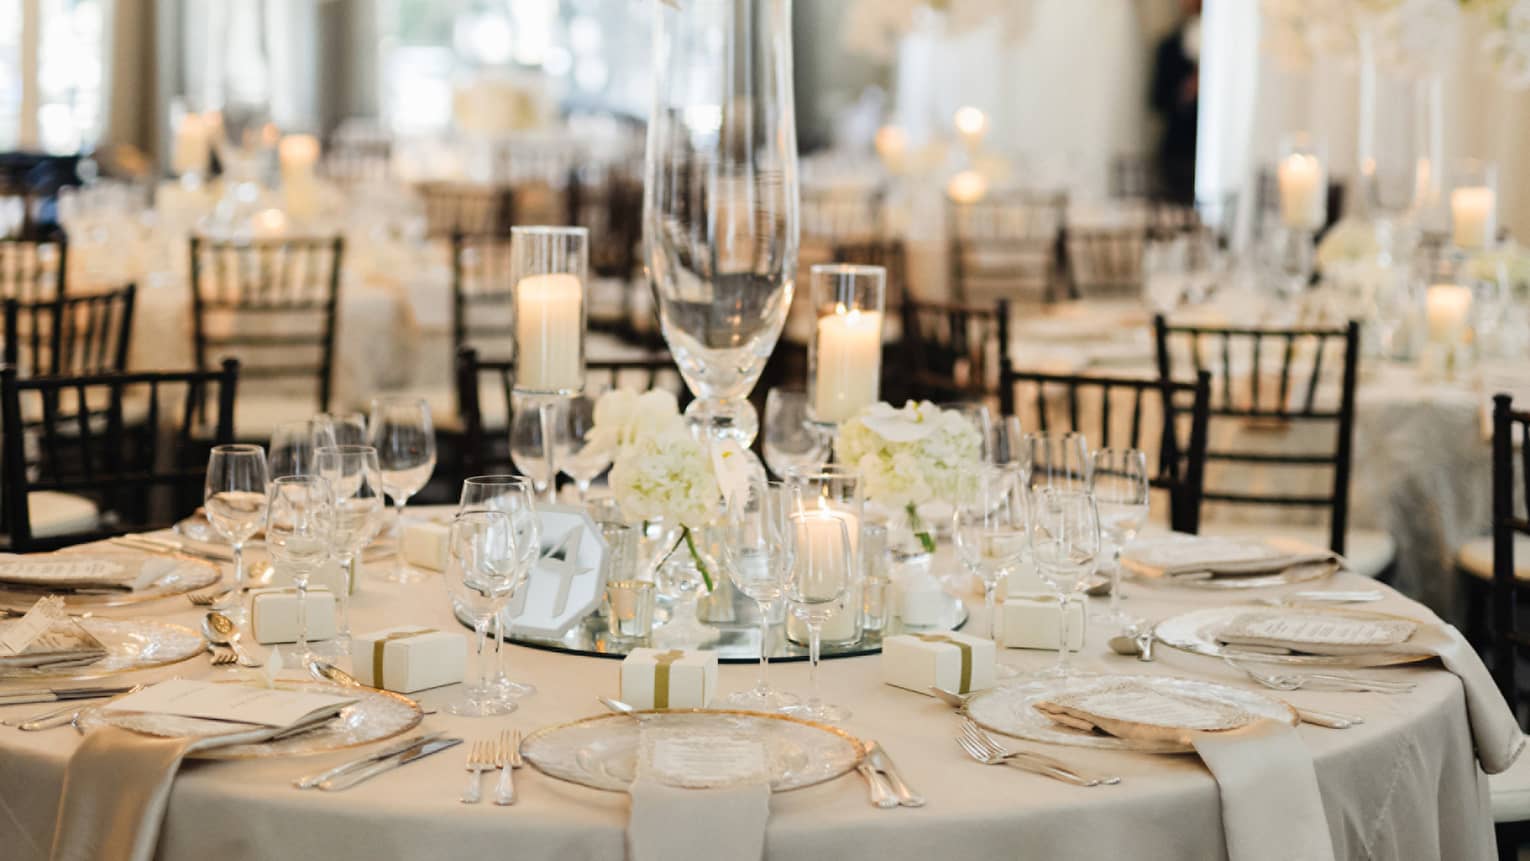 Round wedding banquet table with glassware, candles under tall white floral arrangement